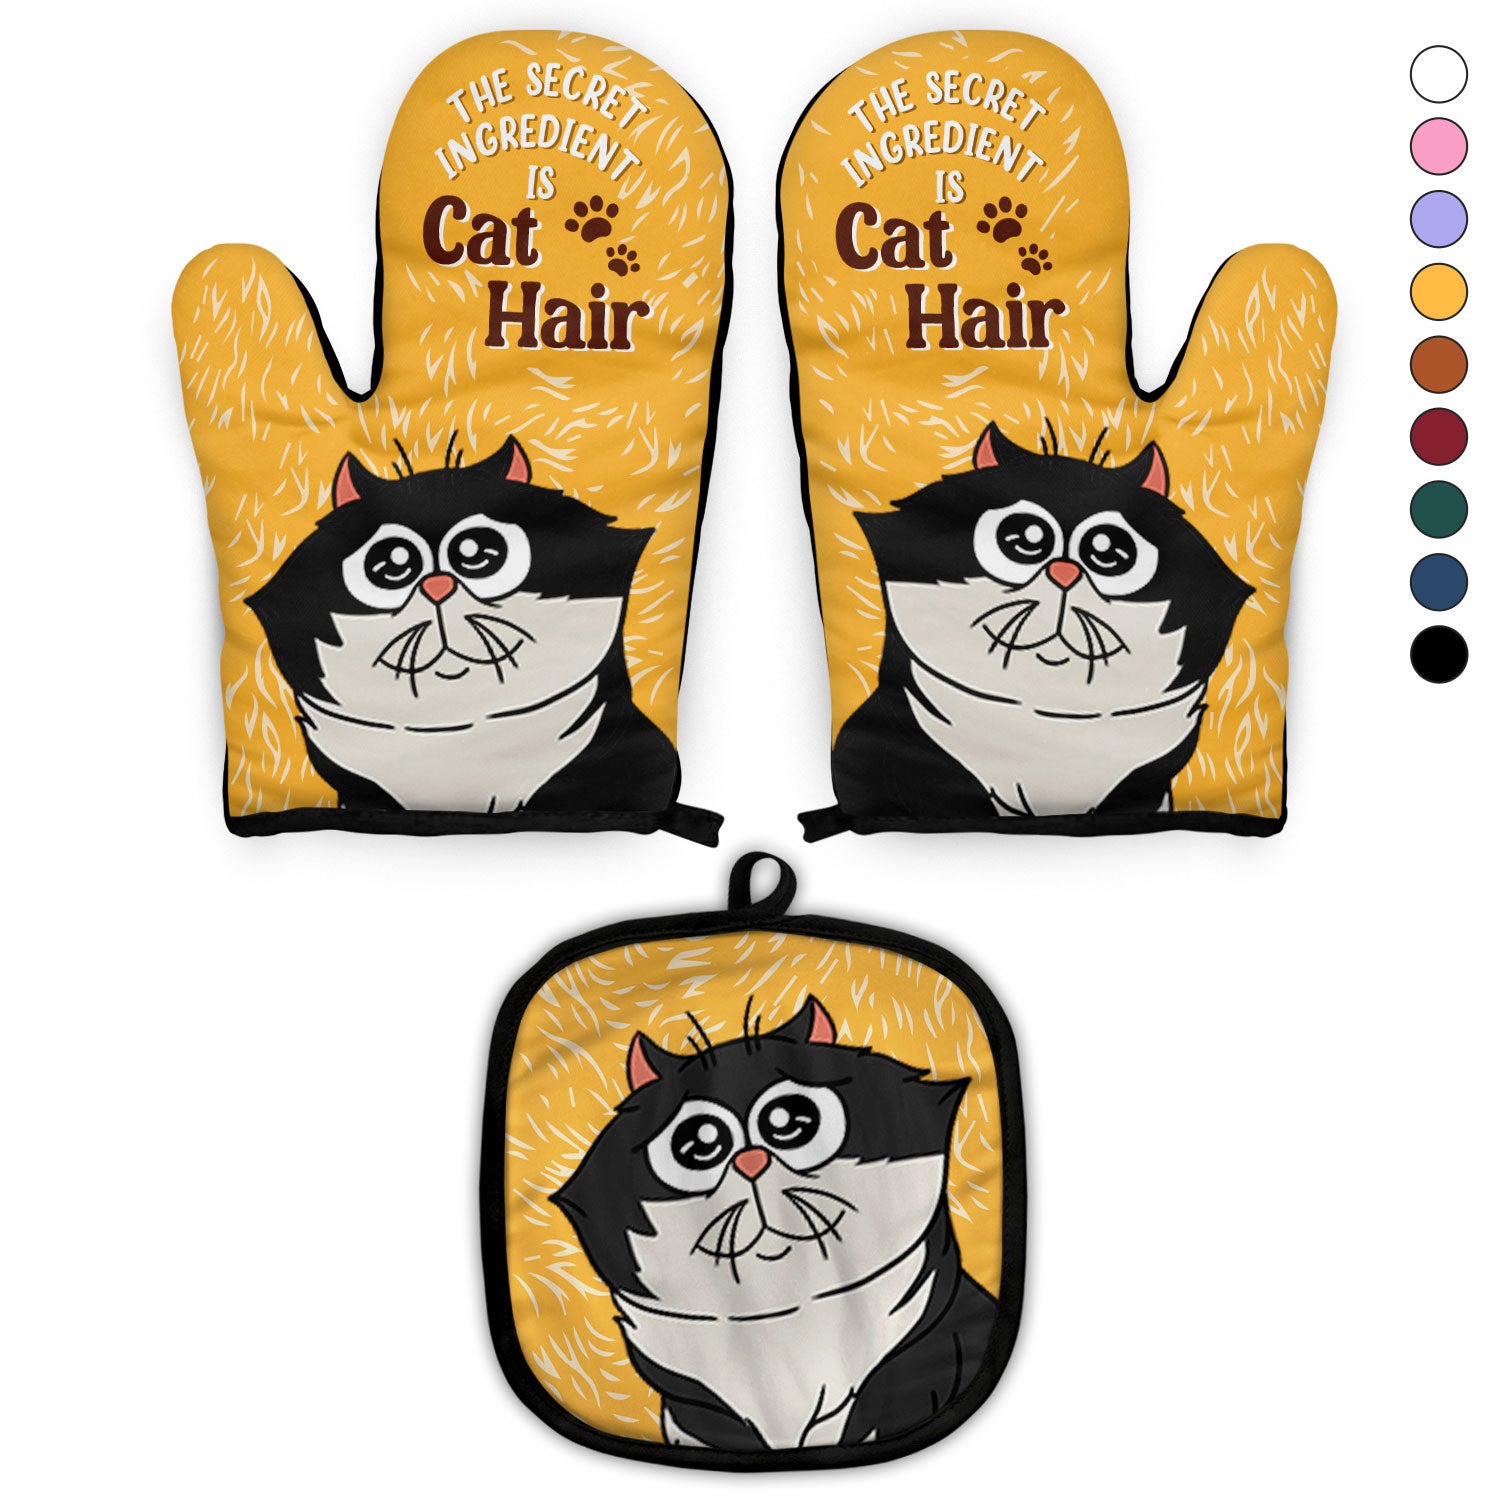 The Secret Ingredient Is Cat Hair - Gift For Cat Lovers - Personalized Oven Mitts, Pot Holders